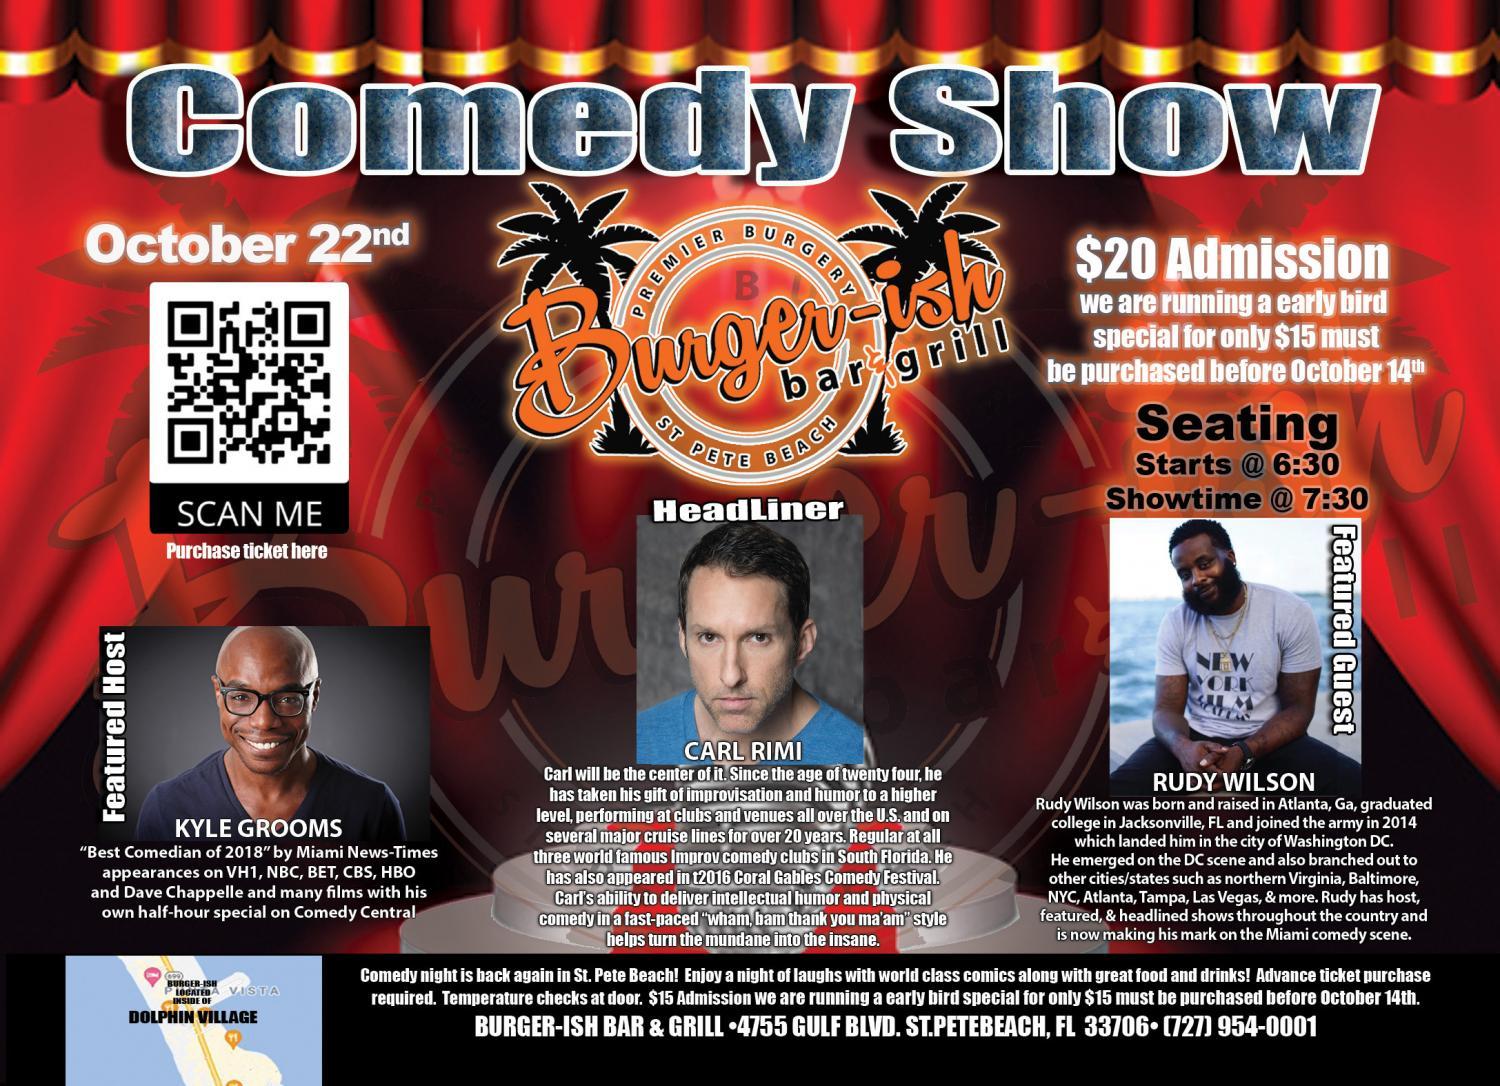 Comedy Show St. Pete Beach
Sat Oct 22, 6:30 PM - Sat Oct 22, 11:00 PM
in 2 days